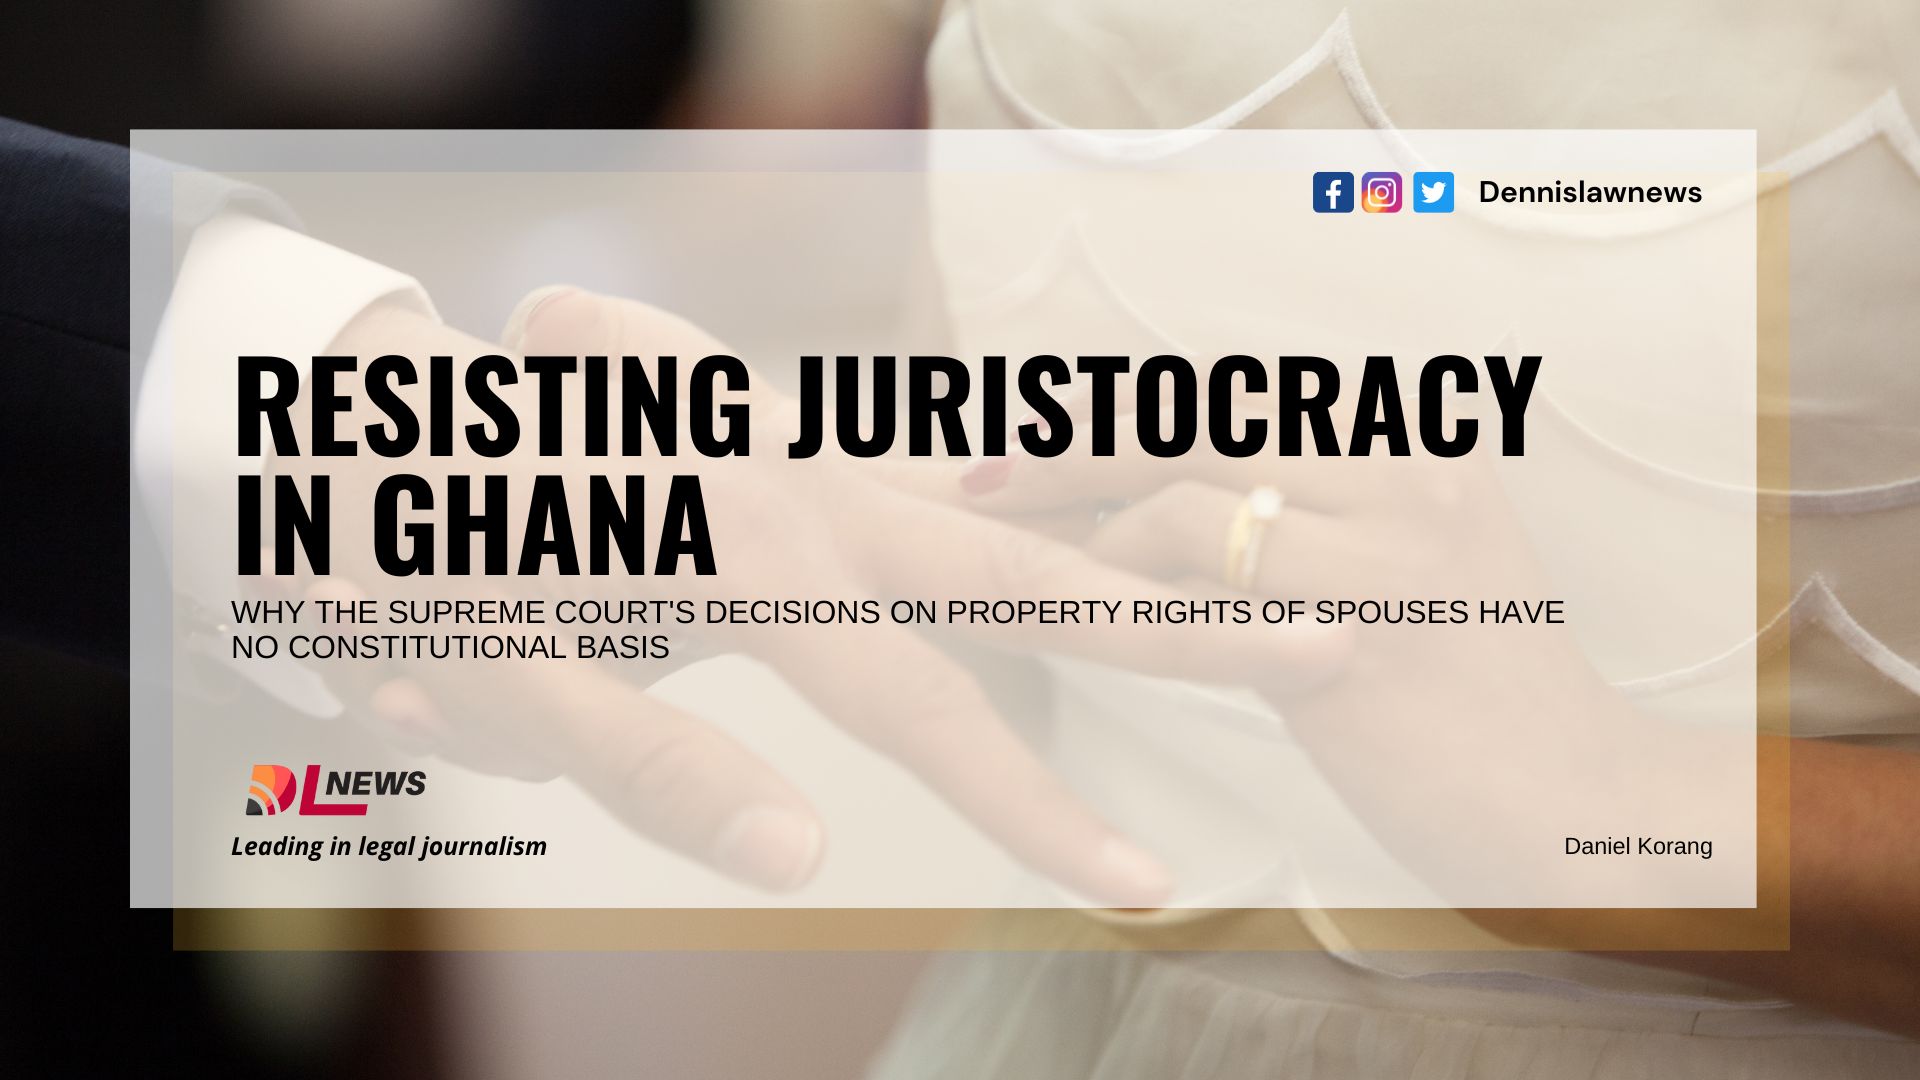 Ghana 3 Men Kuwait Porn Sexually Abused - Resisting Juristocracy in Ghana: Why the Supreme Court's decisions on  Property Rights of Spouses have no constitutional basis | DLN